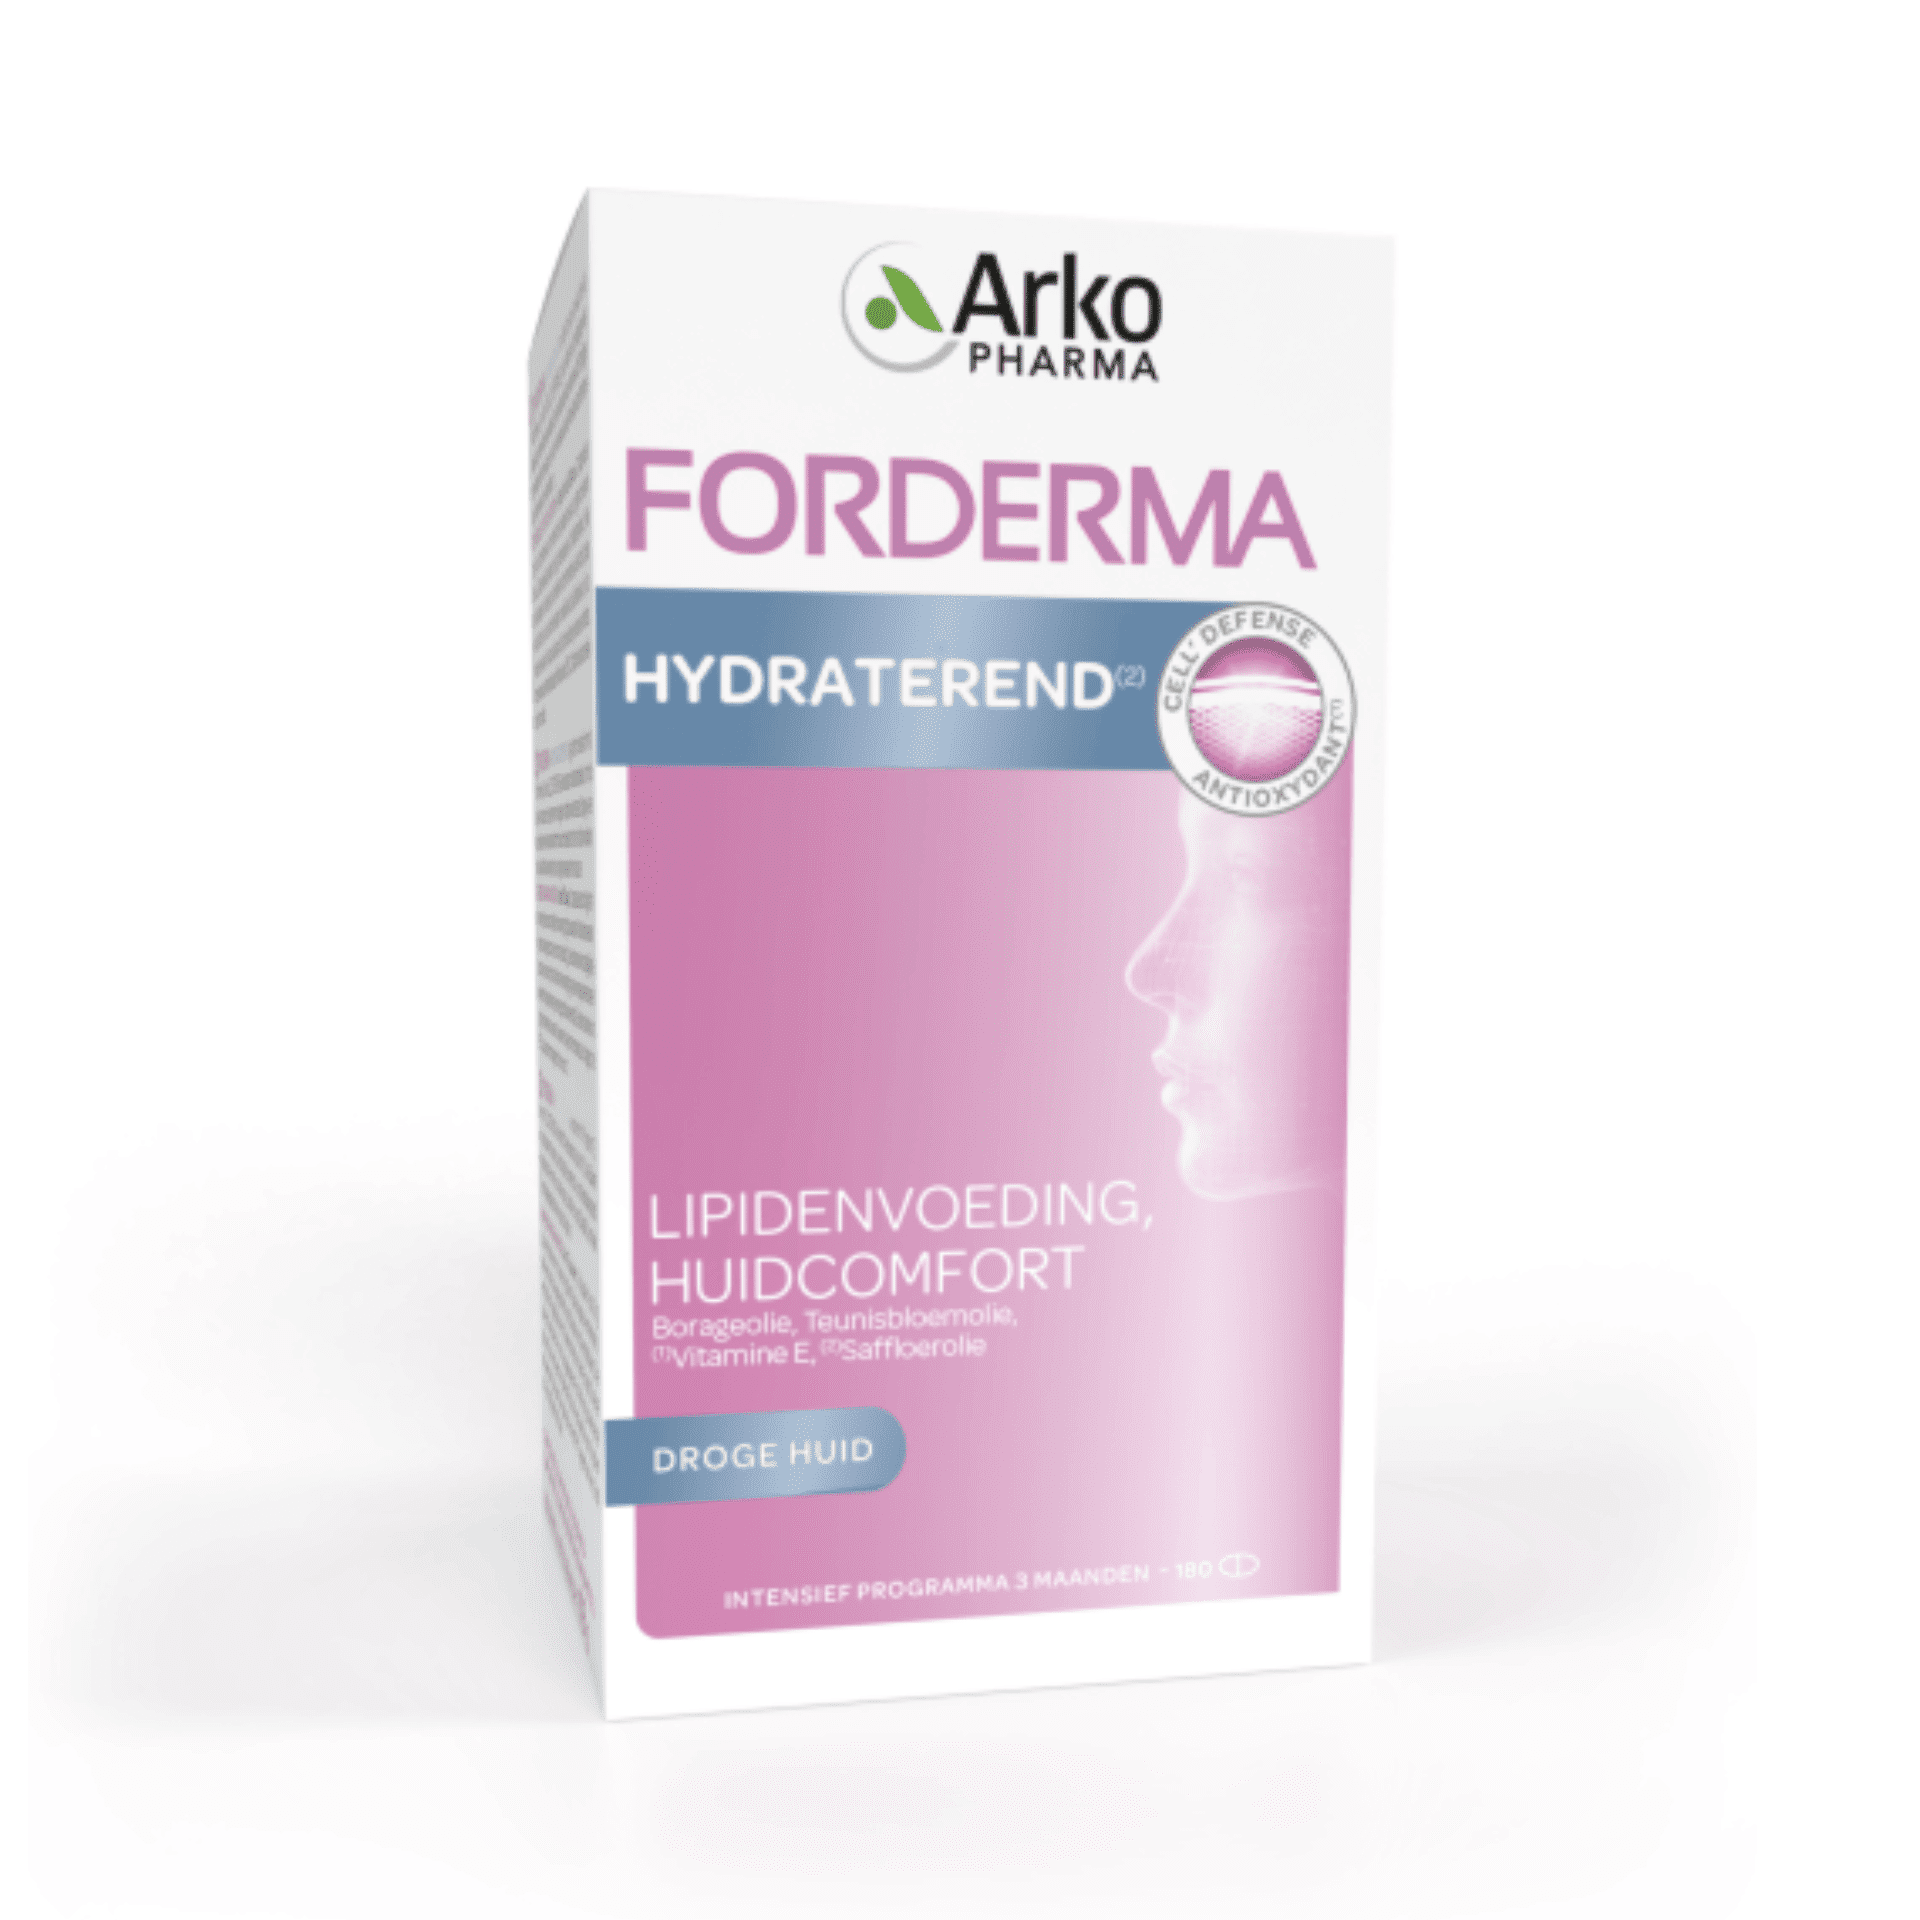 Arkopharma Forderma Hydraterend 